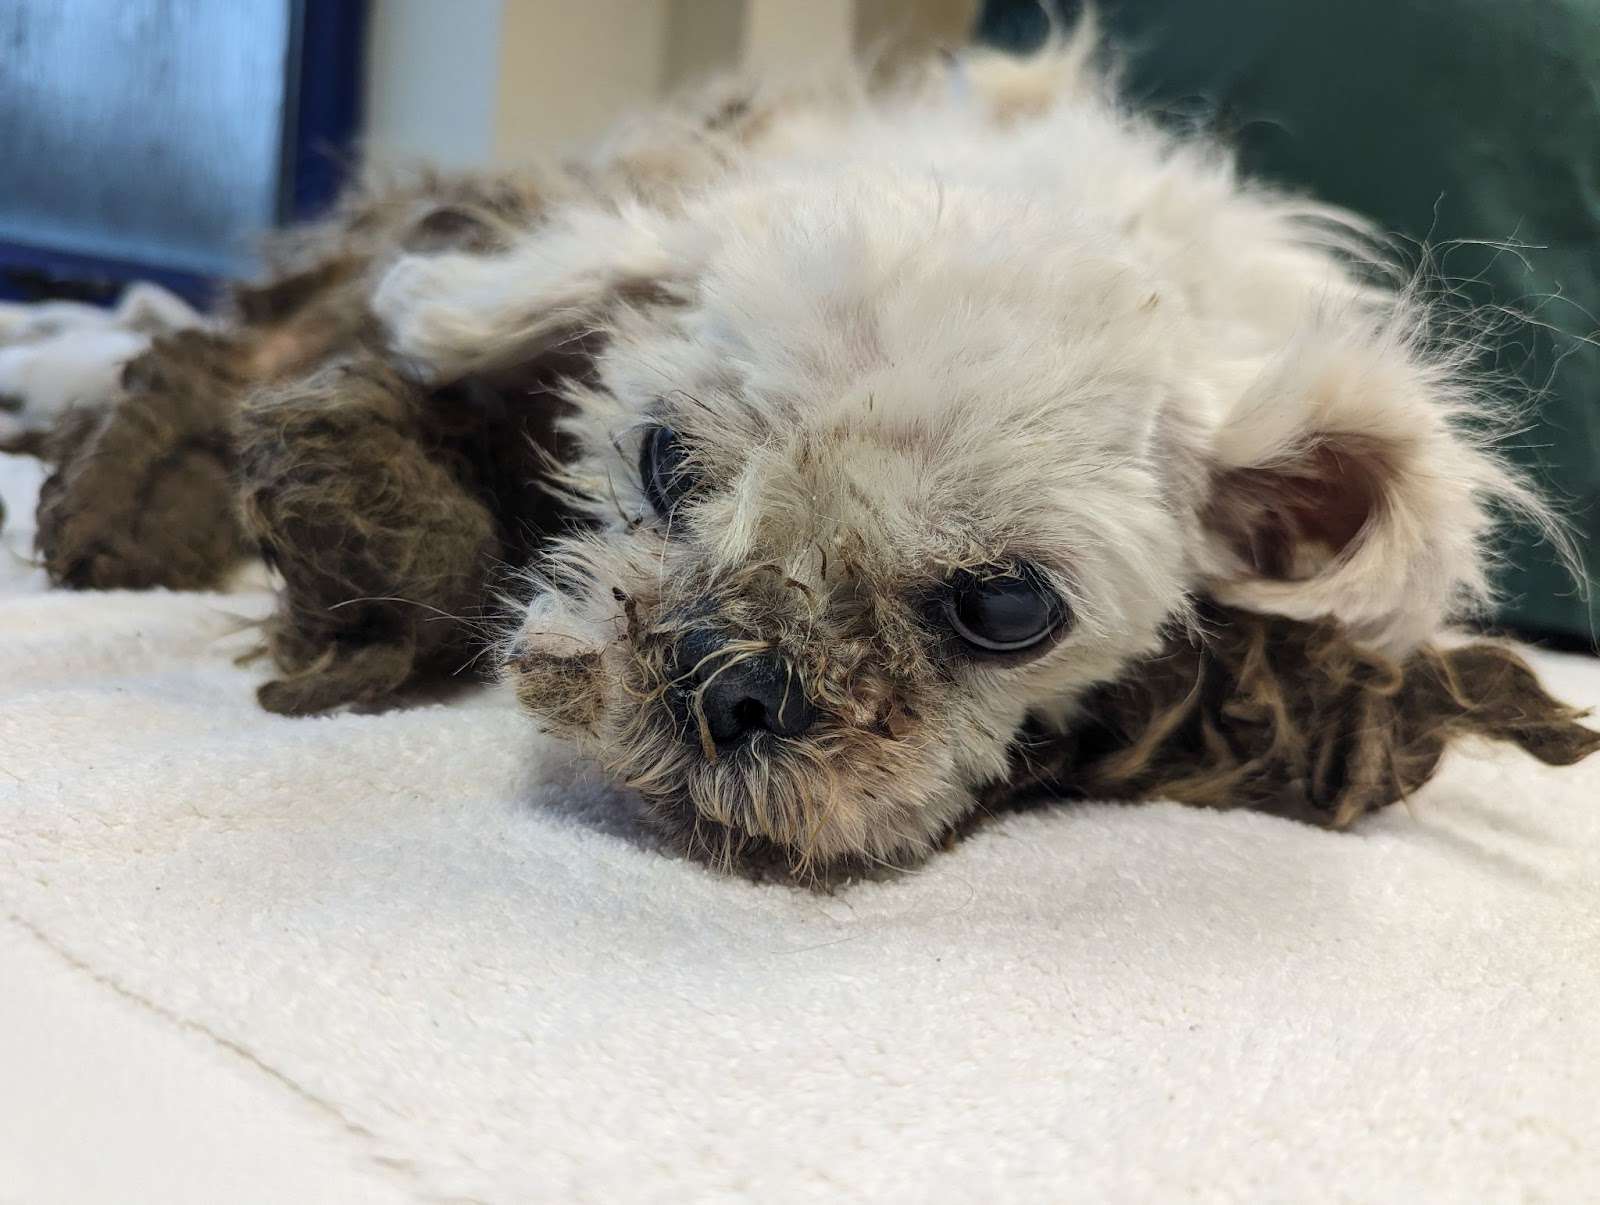 Badly matted and unwell dog found abandoned in Bridgend